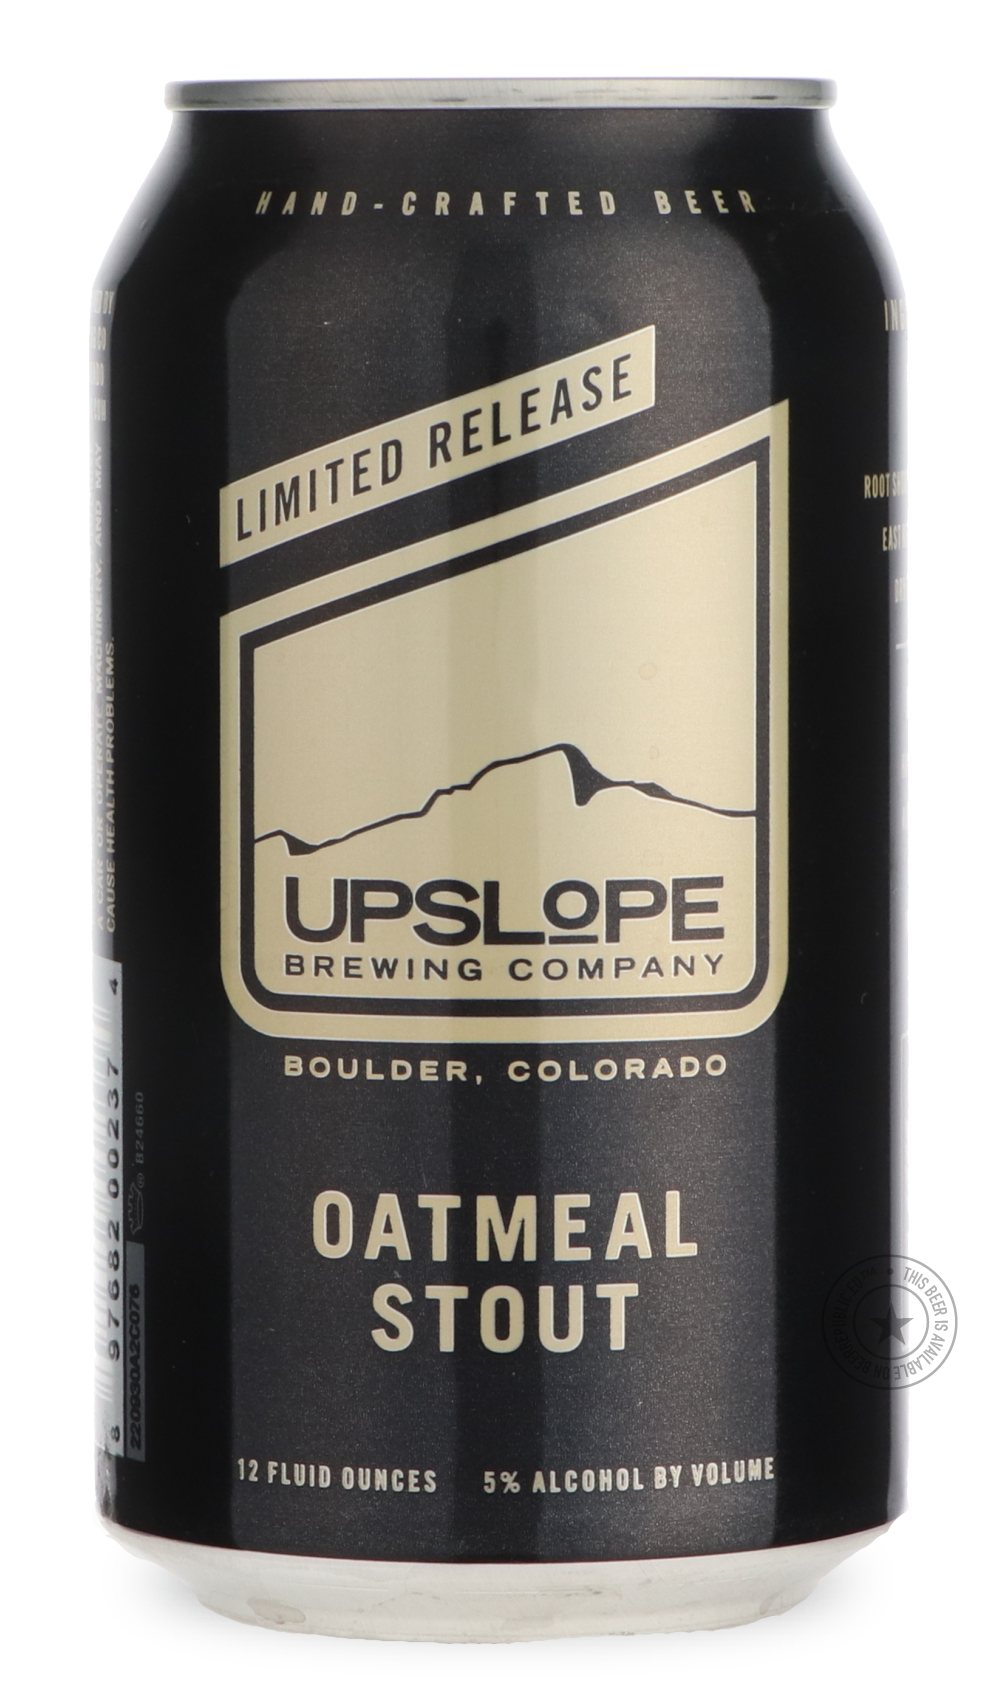 -Upslope- Oatmeal Stout-Brown & Dark- Only @ Beer Republic - The best online beer store for American & Canadian craft beer - Buy beer online from the USA and Canada - Bier online kopen - Amerikaans bier kopen - Craft beer store - Craft beer kopen - Amerikanisch bier kaufen - Bier online kaufen - Acheter biere online - IPA - Stout - Porter - New England IPA - Hazy IPA - Imperial Stout - Barrel Aged - Barrel Aged Imperial Stout - Brown - Dark beer - Blond - Blonde - Pilsner - Lager - Wheat - Weizen - Amber - 